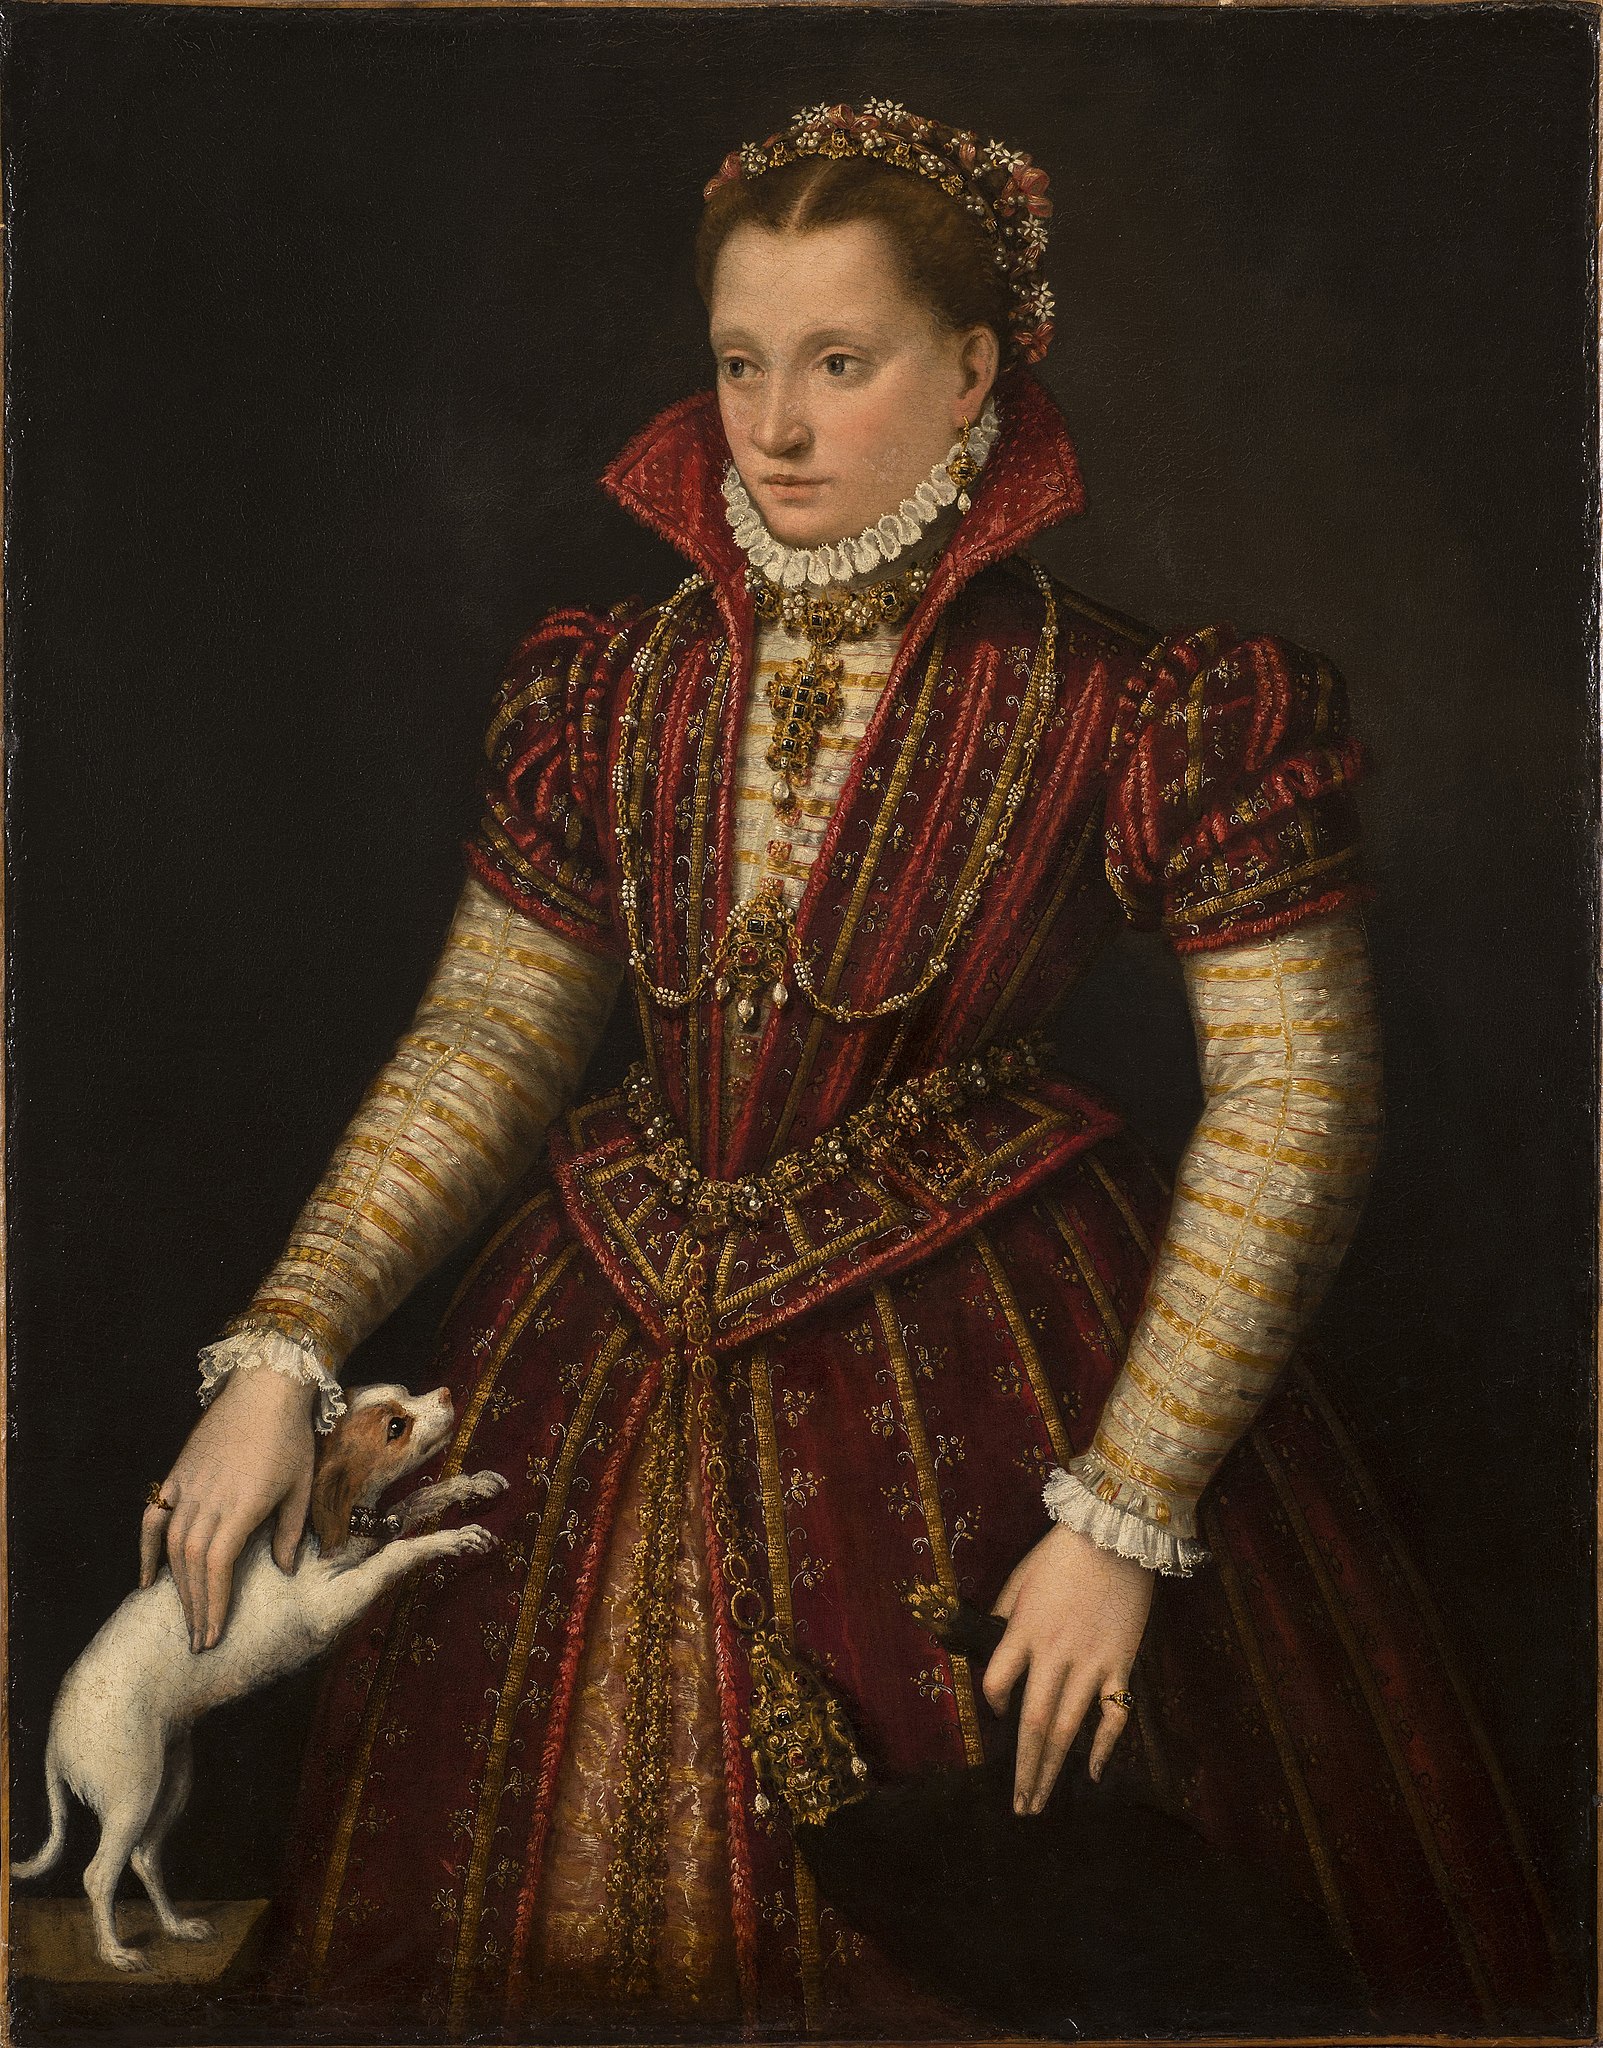 Portrait of a Noblewoman by Lavinia Fontana - 1580 - 115 x 90 cm National Museum of Women in the Arts